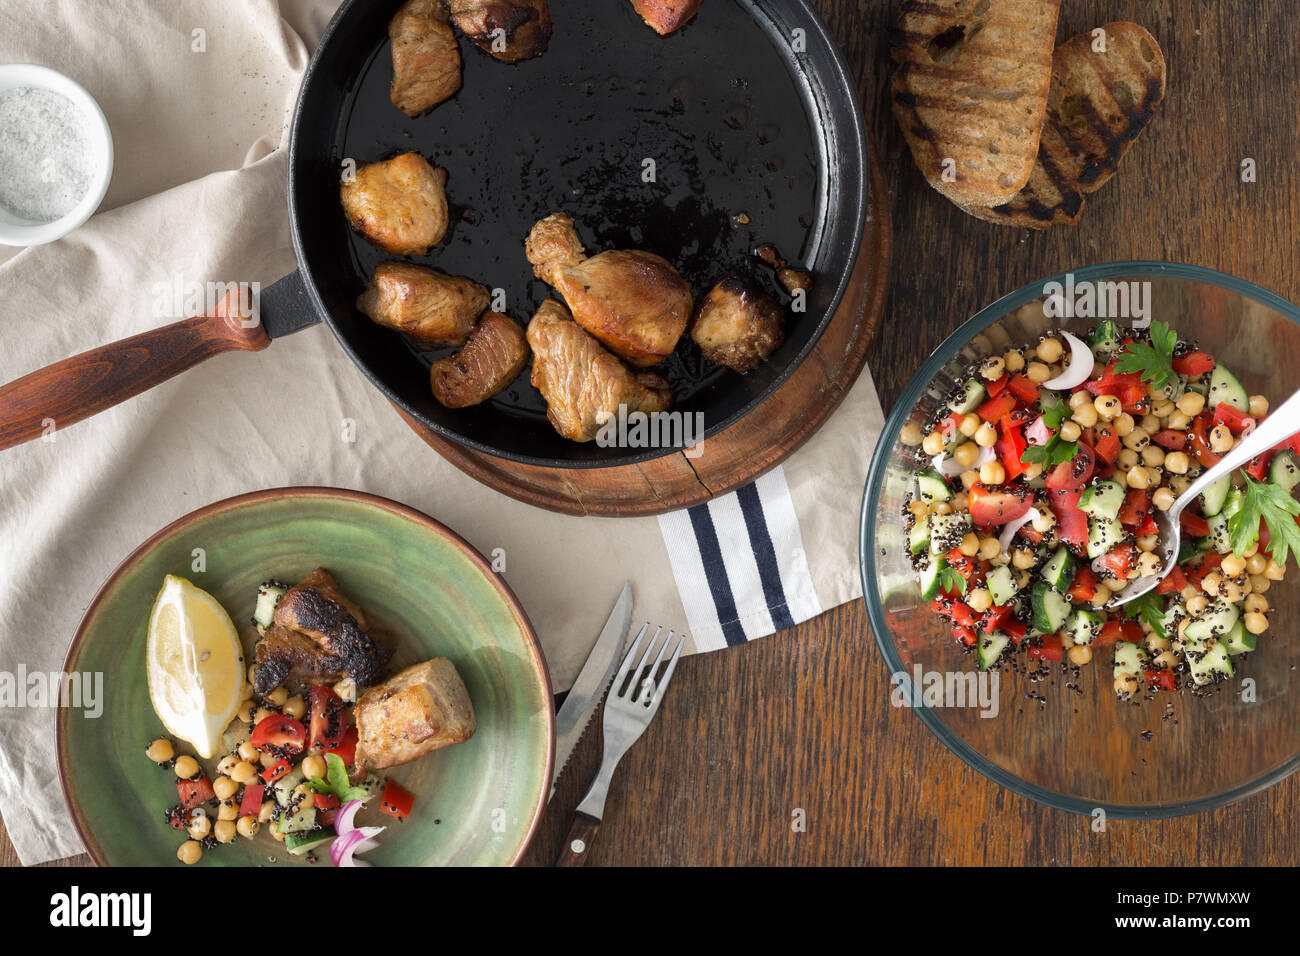 Fried meat in pan on wooden table with fresh vegetable salad of black quinoa and chickpeas, top view. Simple and healthy homemade food Stock Photo